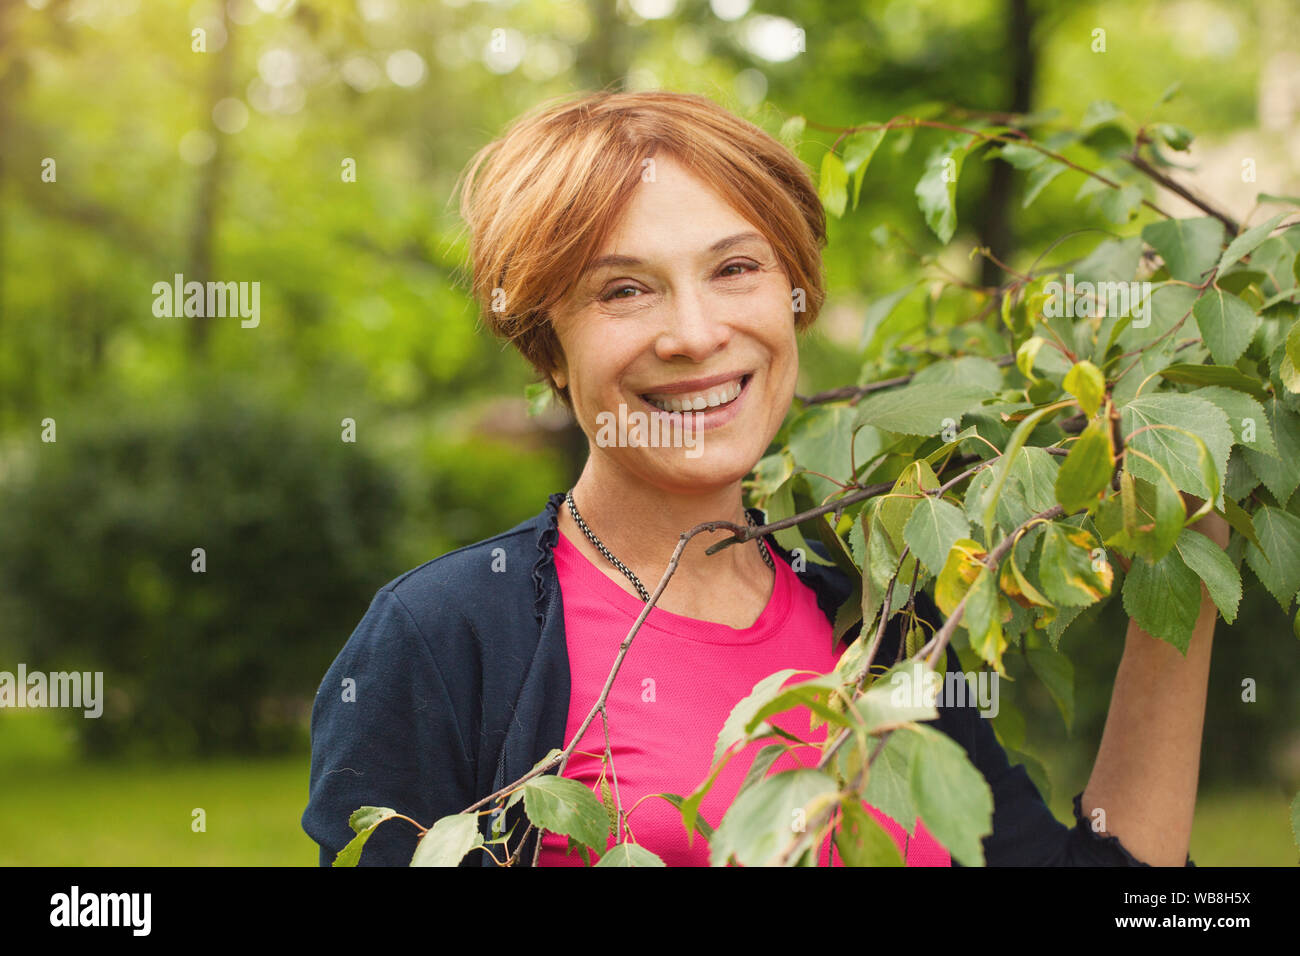 Healthy mature woman having fun with green leaves outdoor. Beautiful model 60 years old Stock Photo